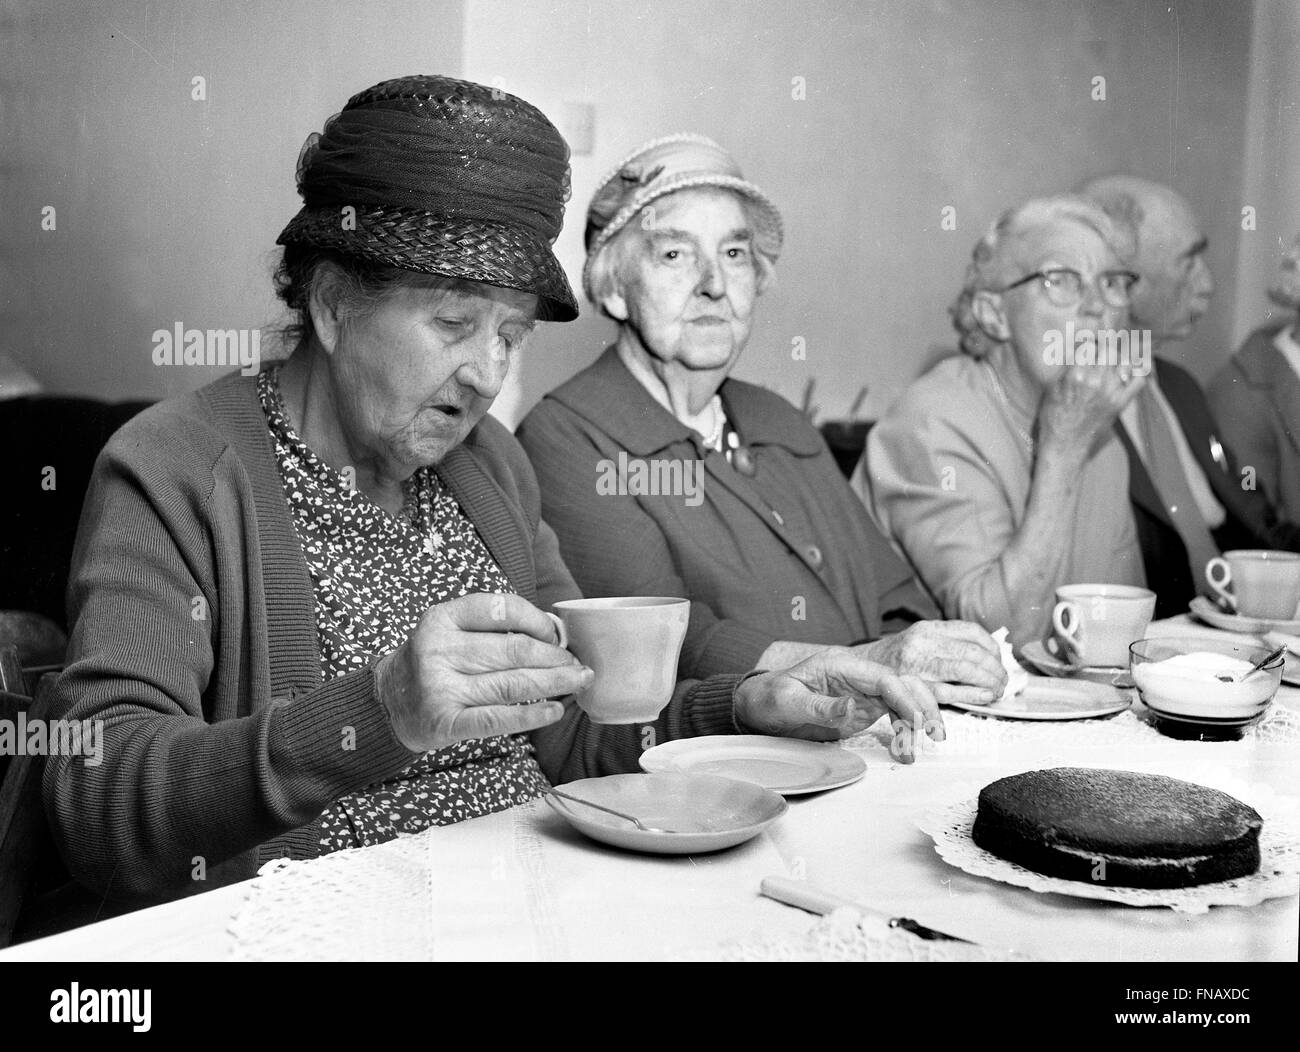 Old elderly folks people socialising over tea and biscuits Britain 1960s PICTURE BY DAVID BAGNALL Stock Photo